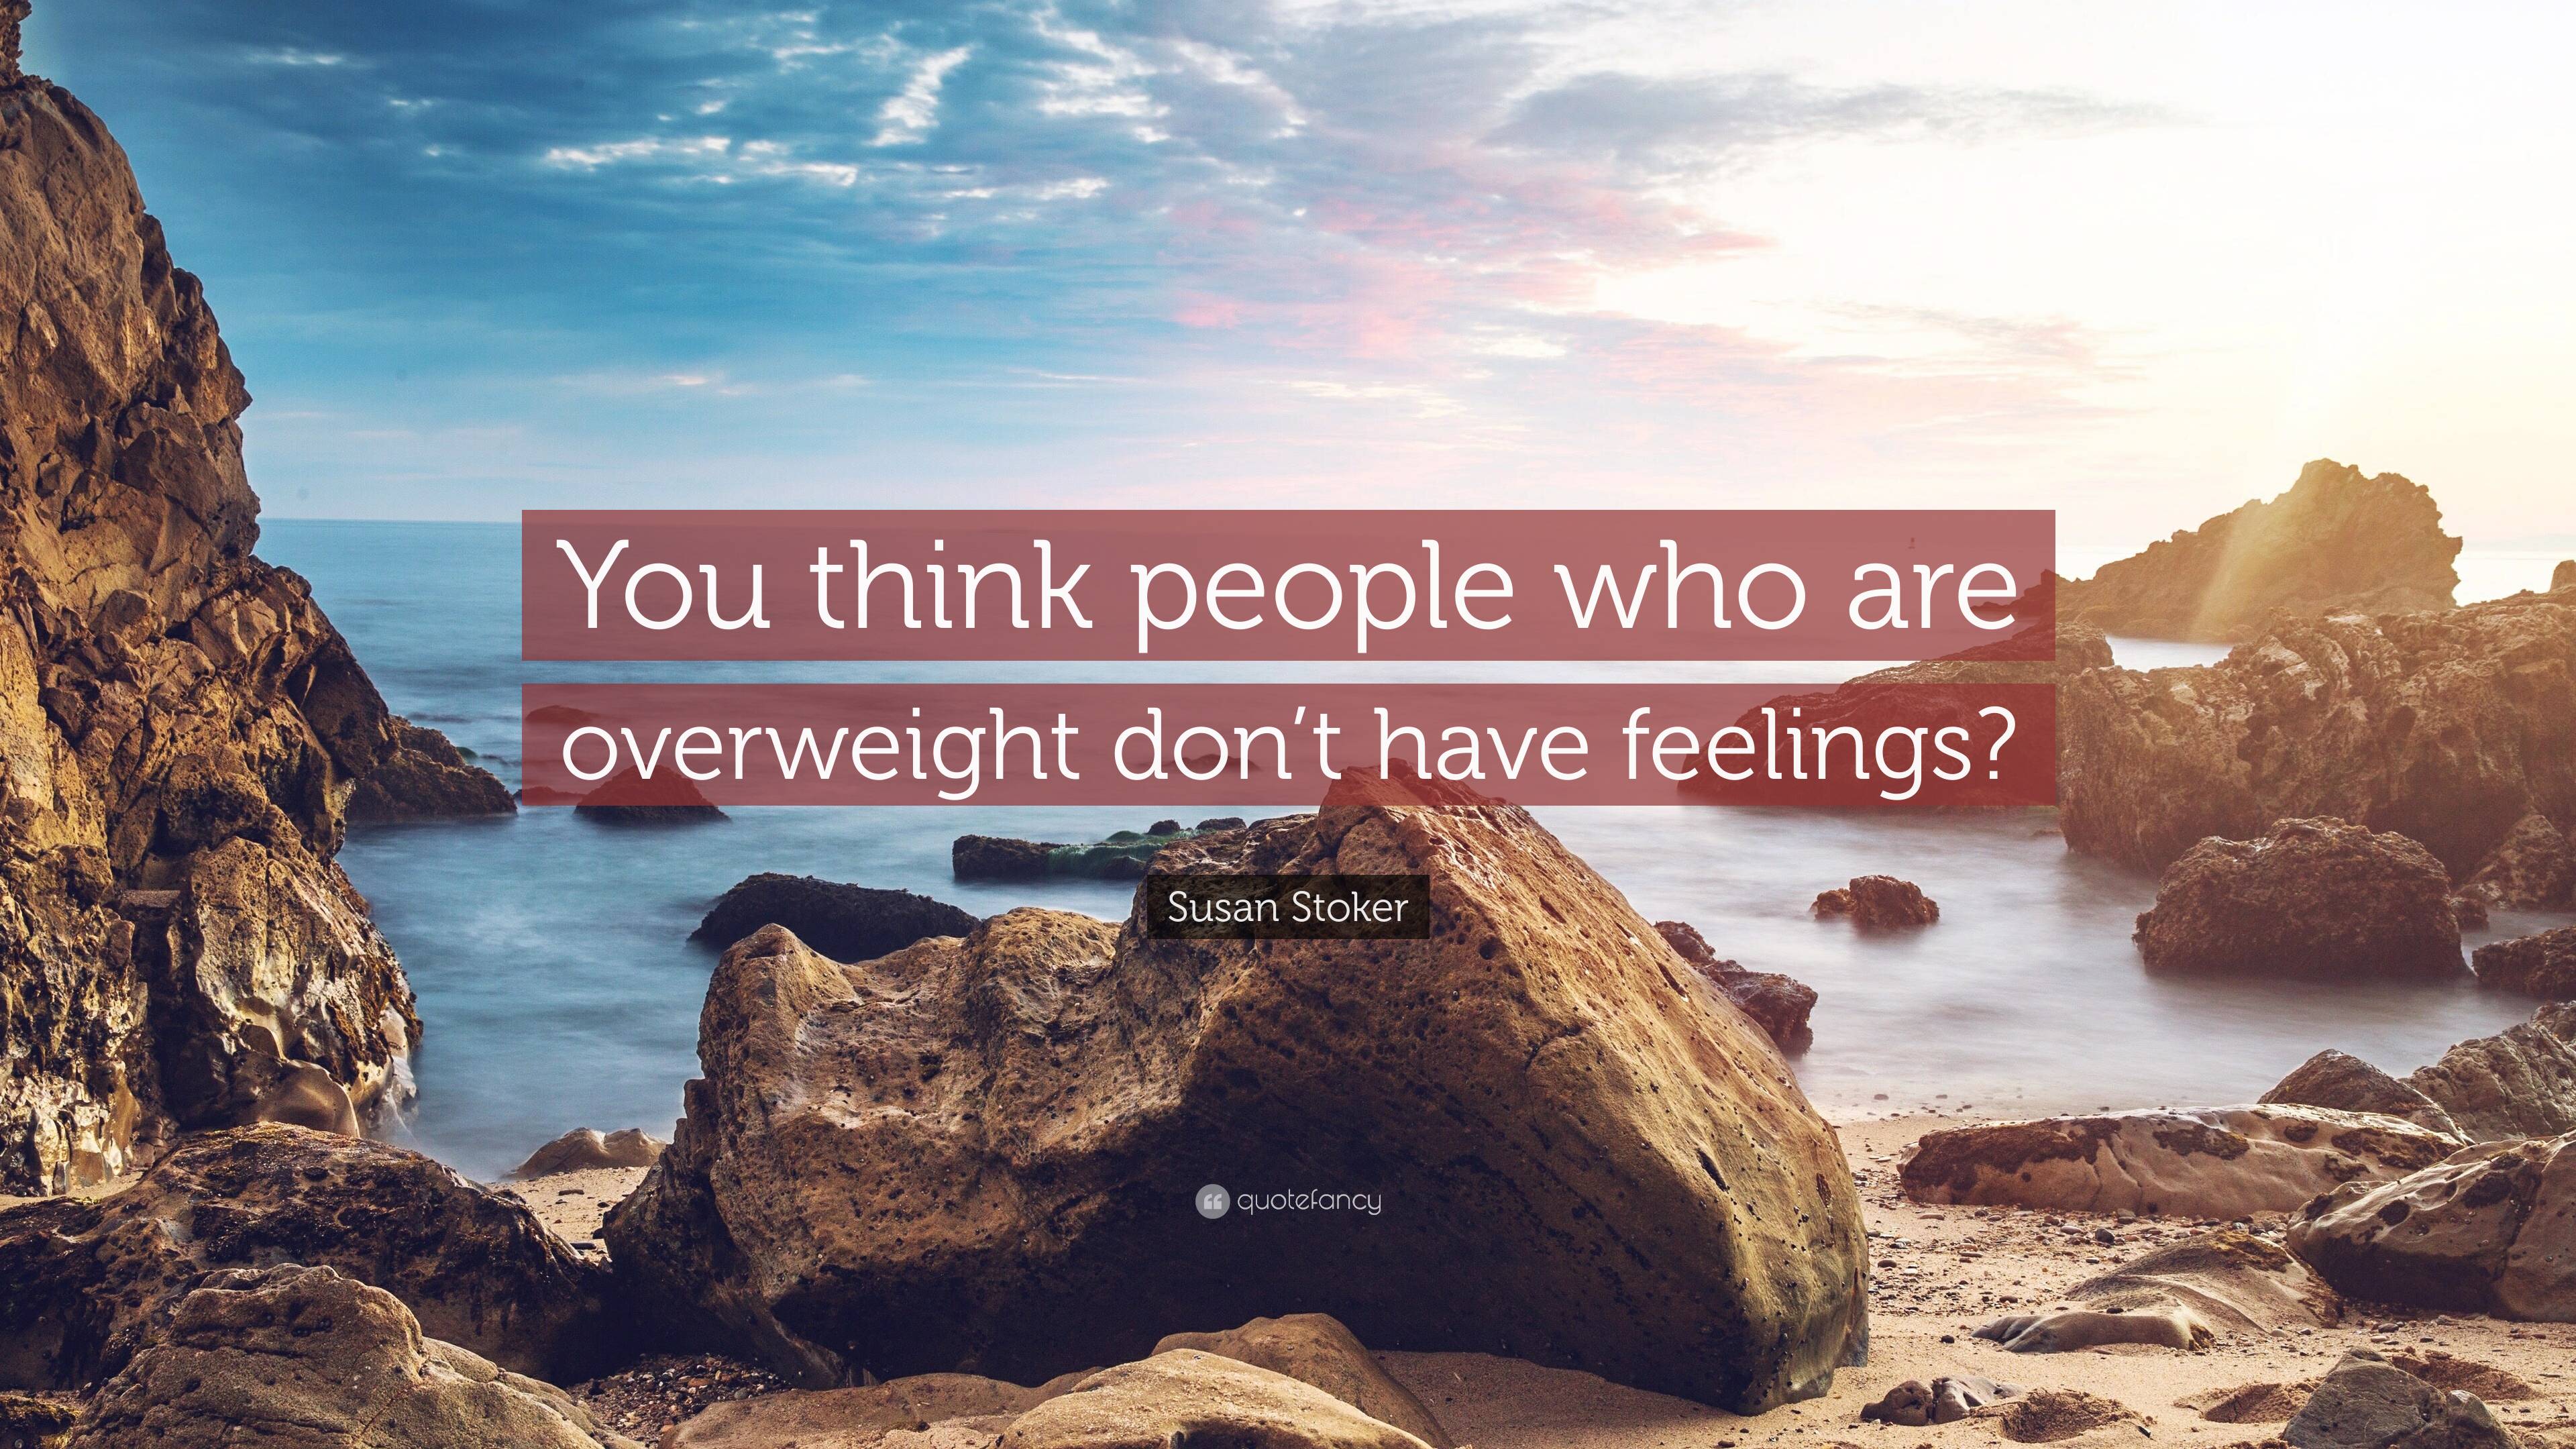 Susan Stoker Quote: “You think people who are overweight don’t have ...